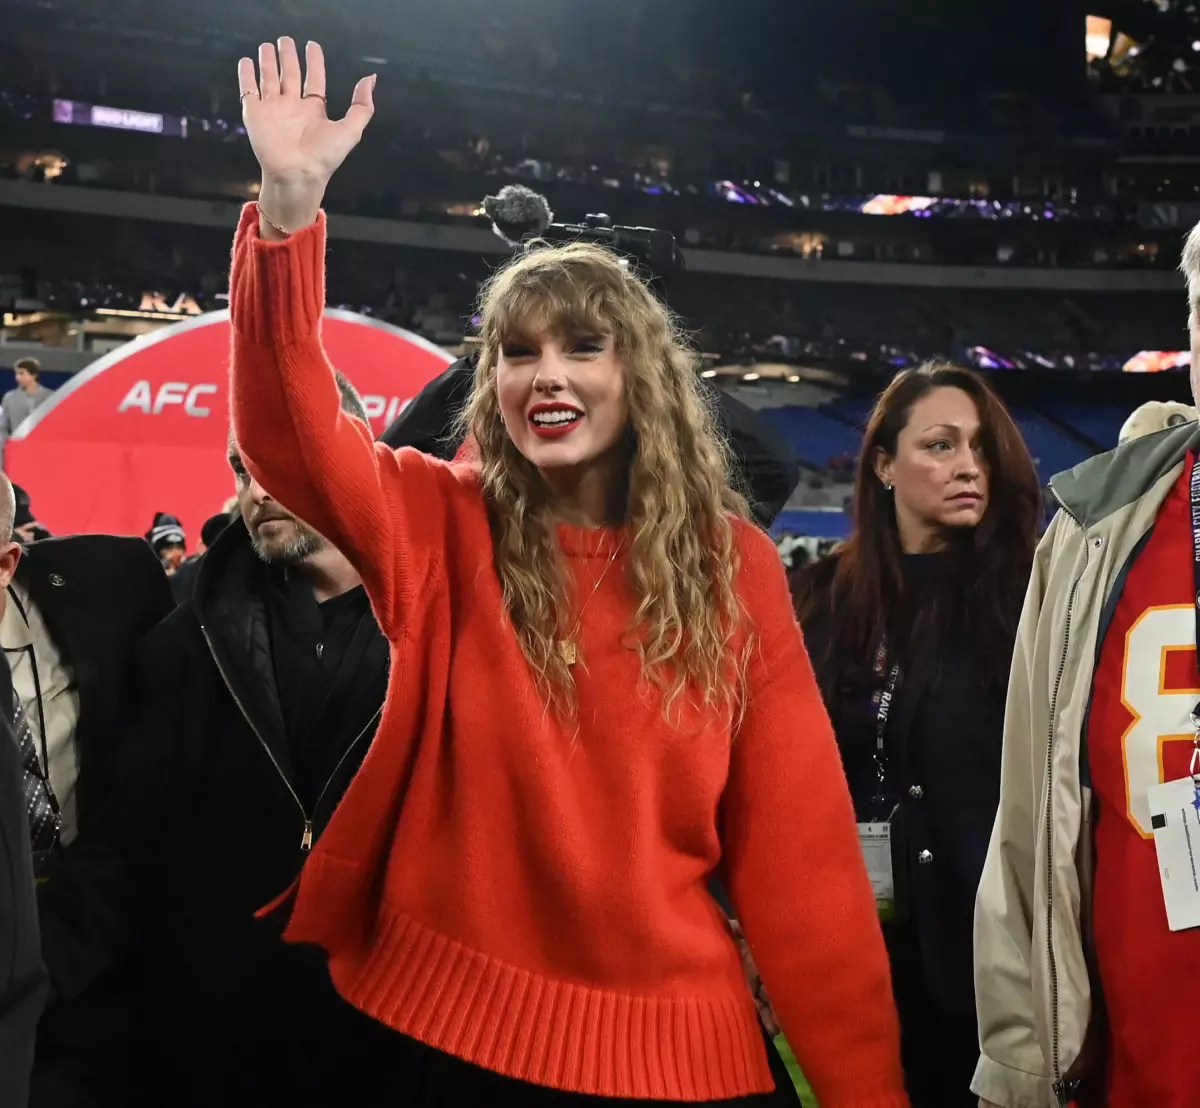 Searches for Taylor Swift produce an error message on X days after explicit deepfake images of the singer went viral on the social media site.